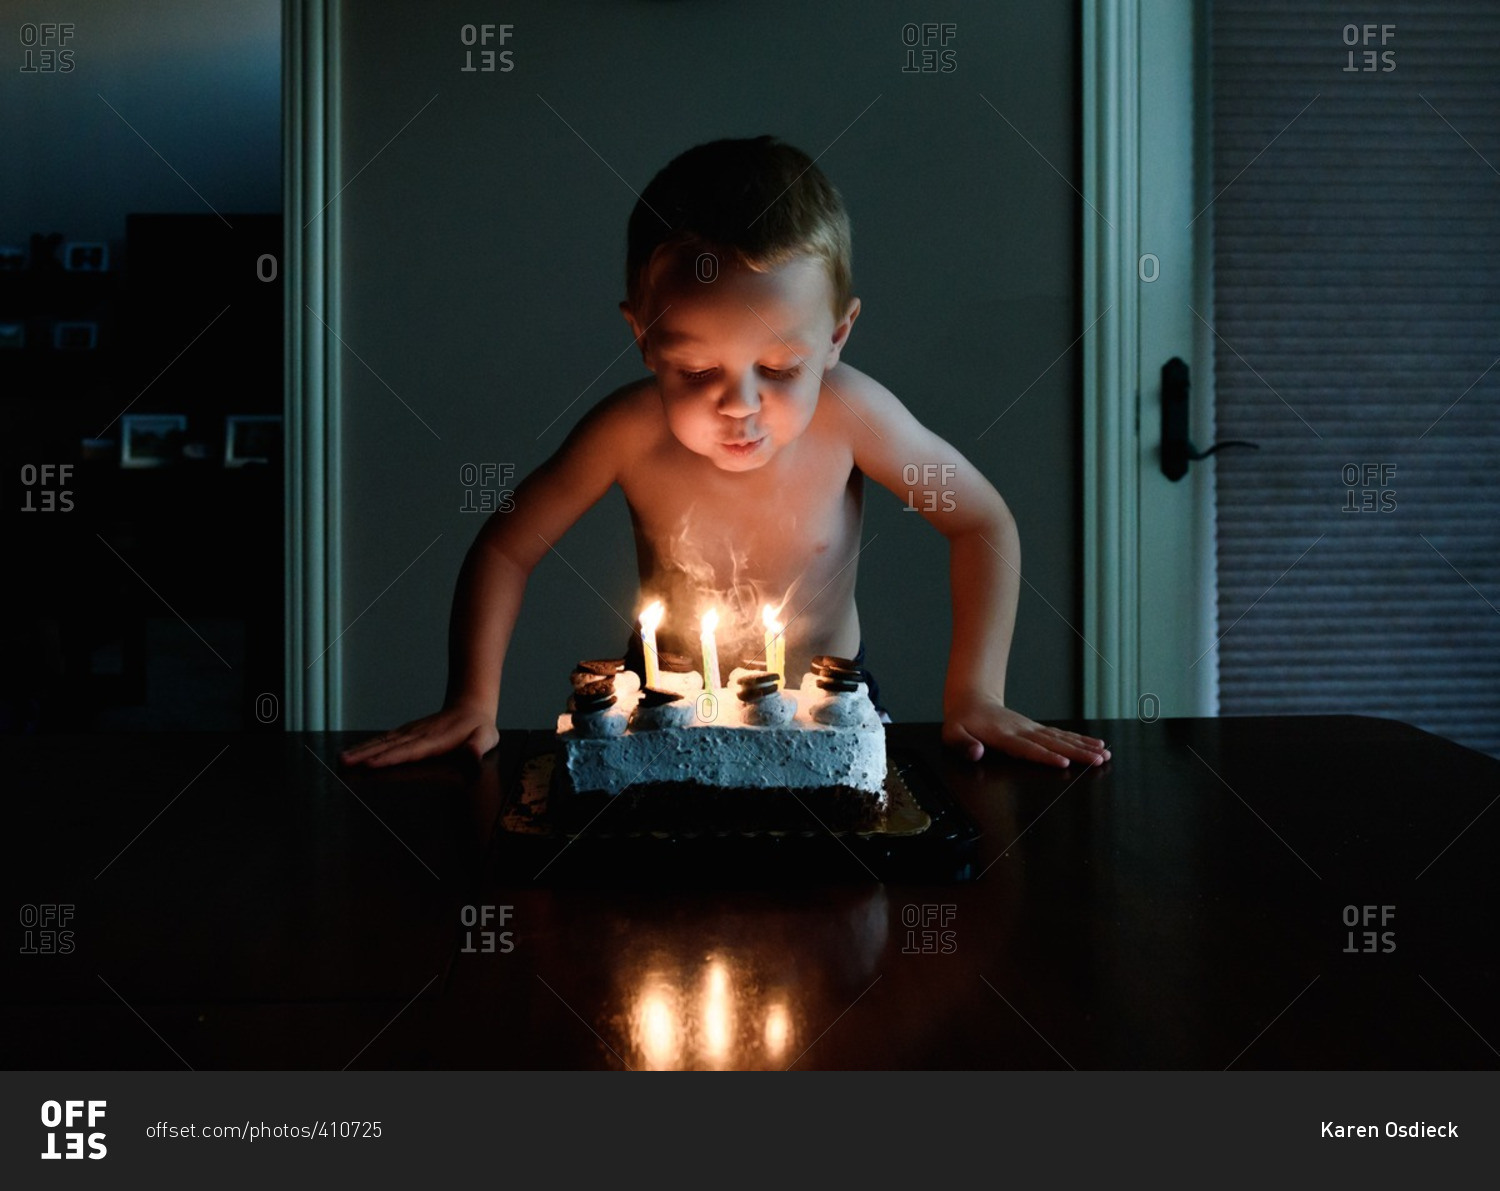 Young boy blowing out candles on his birthday cake